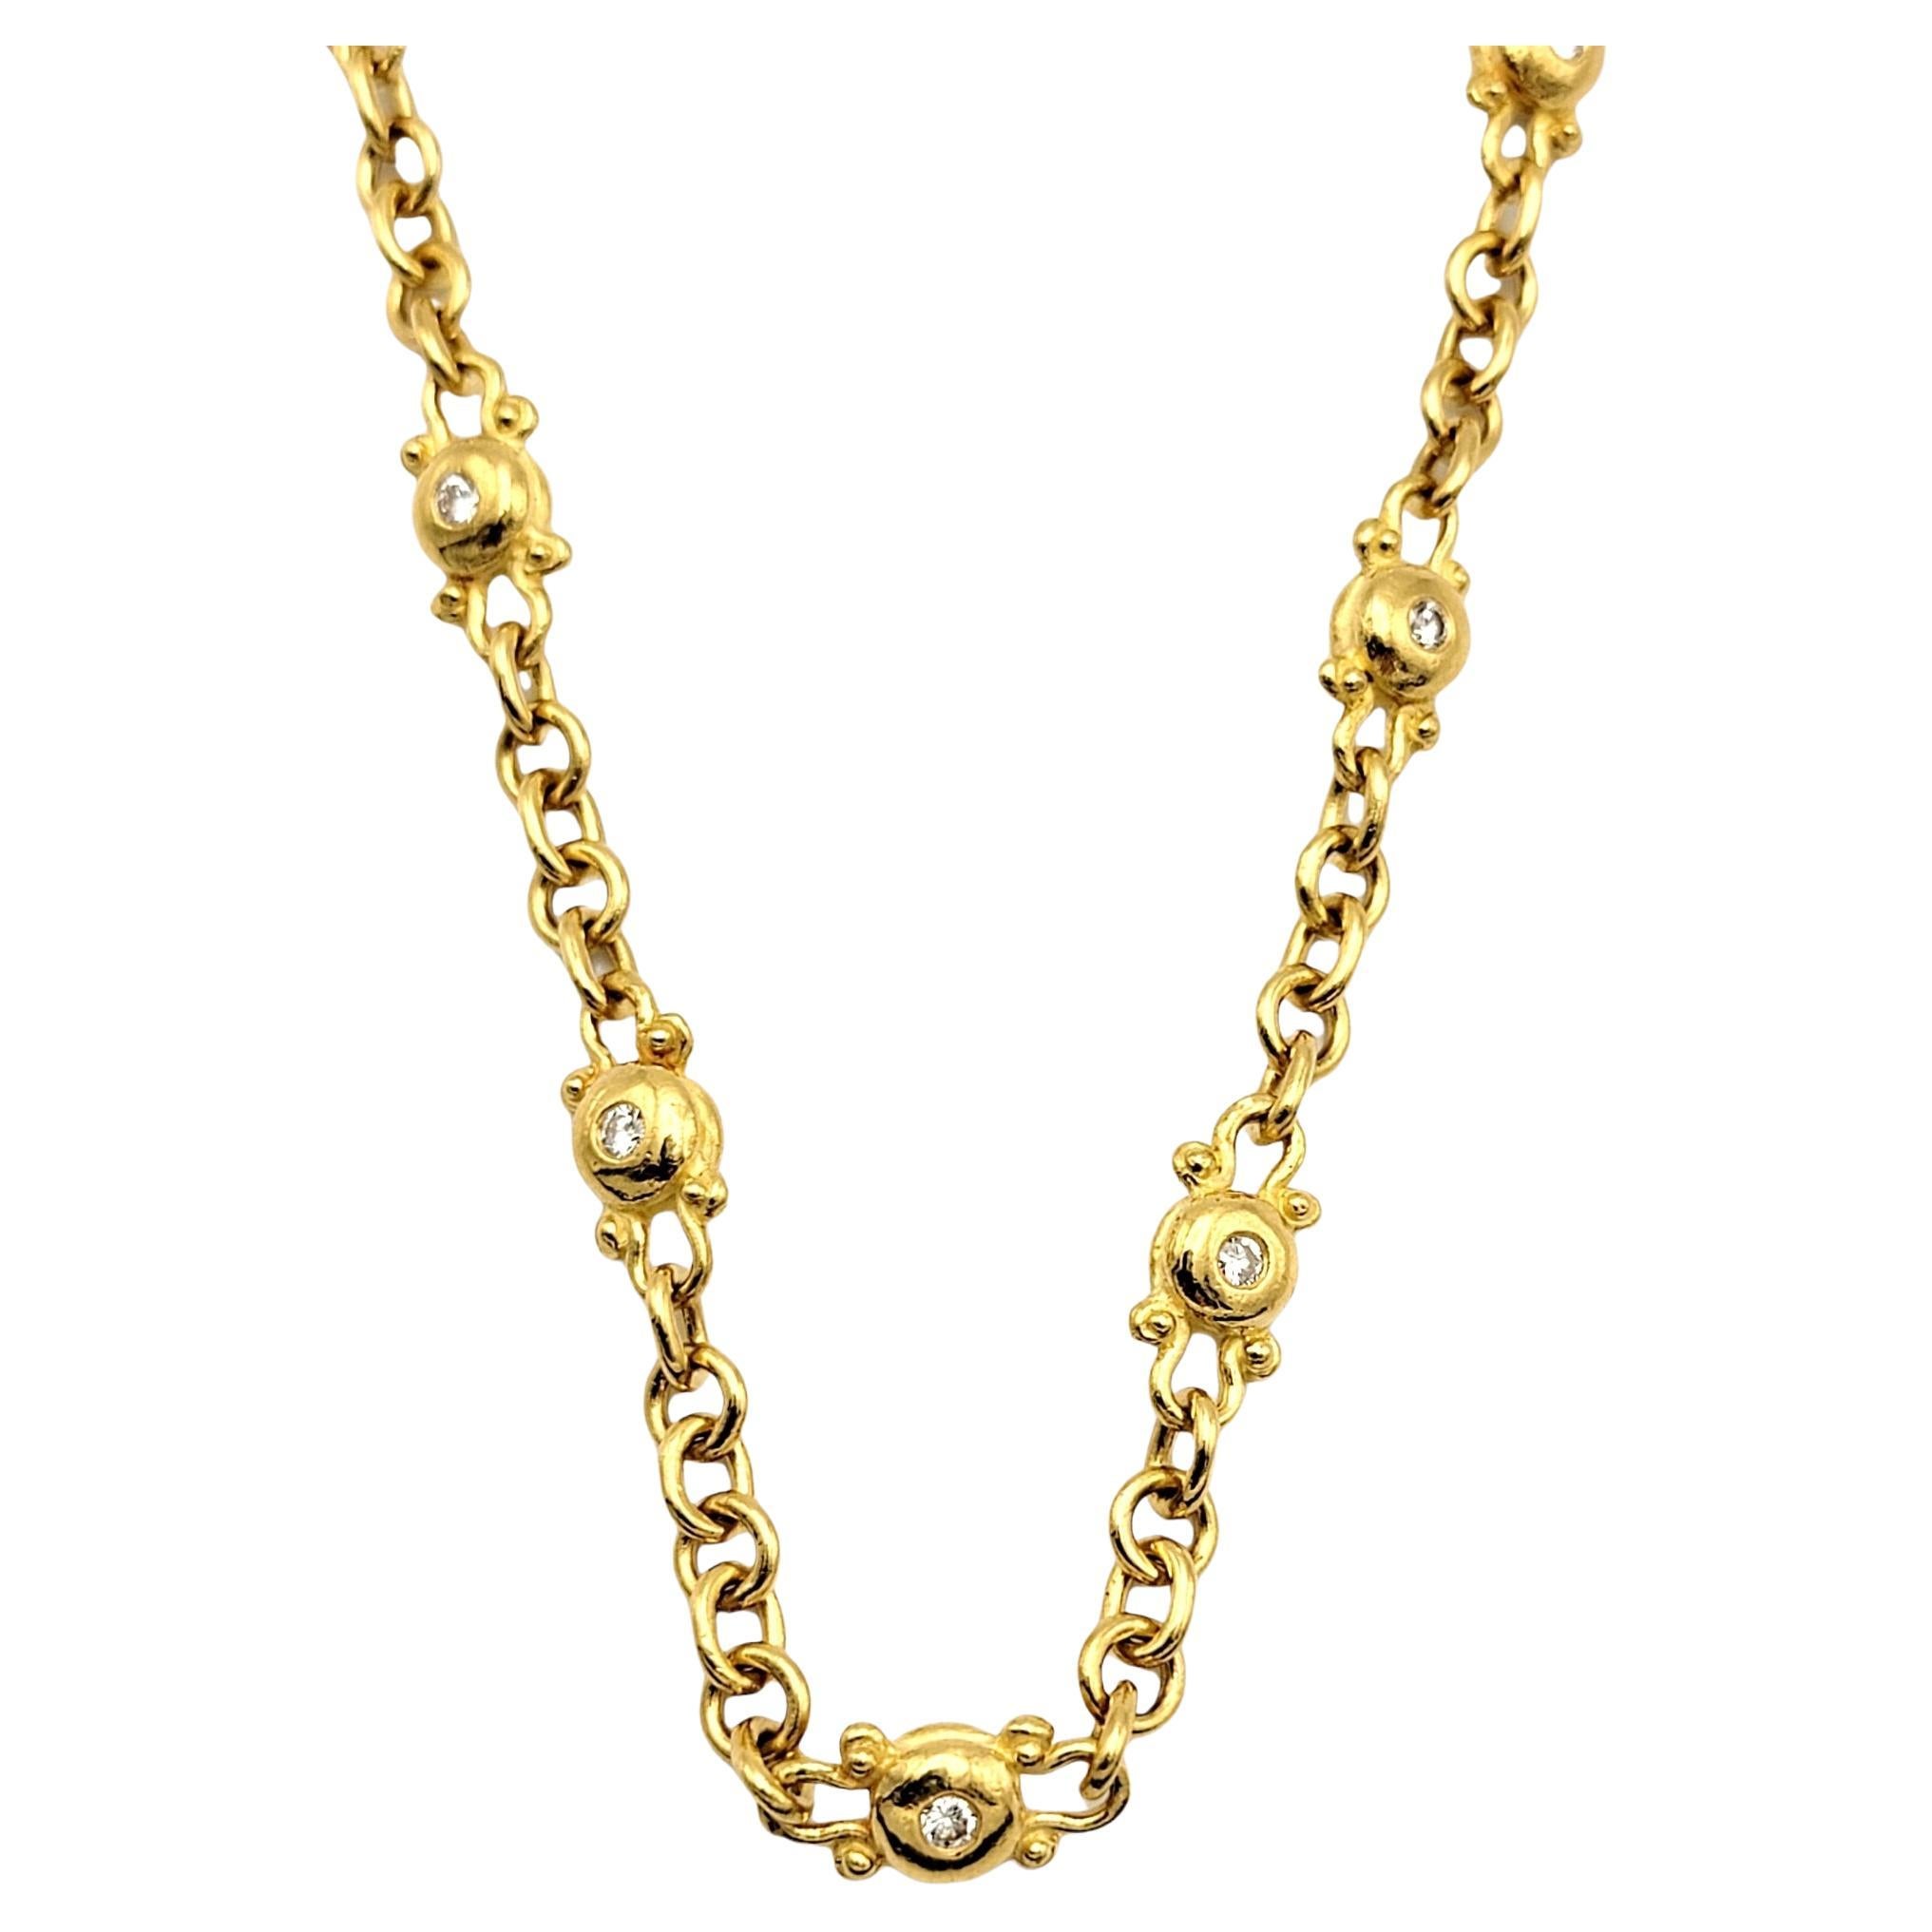 Denise Roberge 22 Karat Yellow Gold Bubble Link Necklace with Diamonds